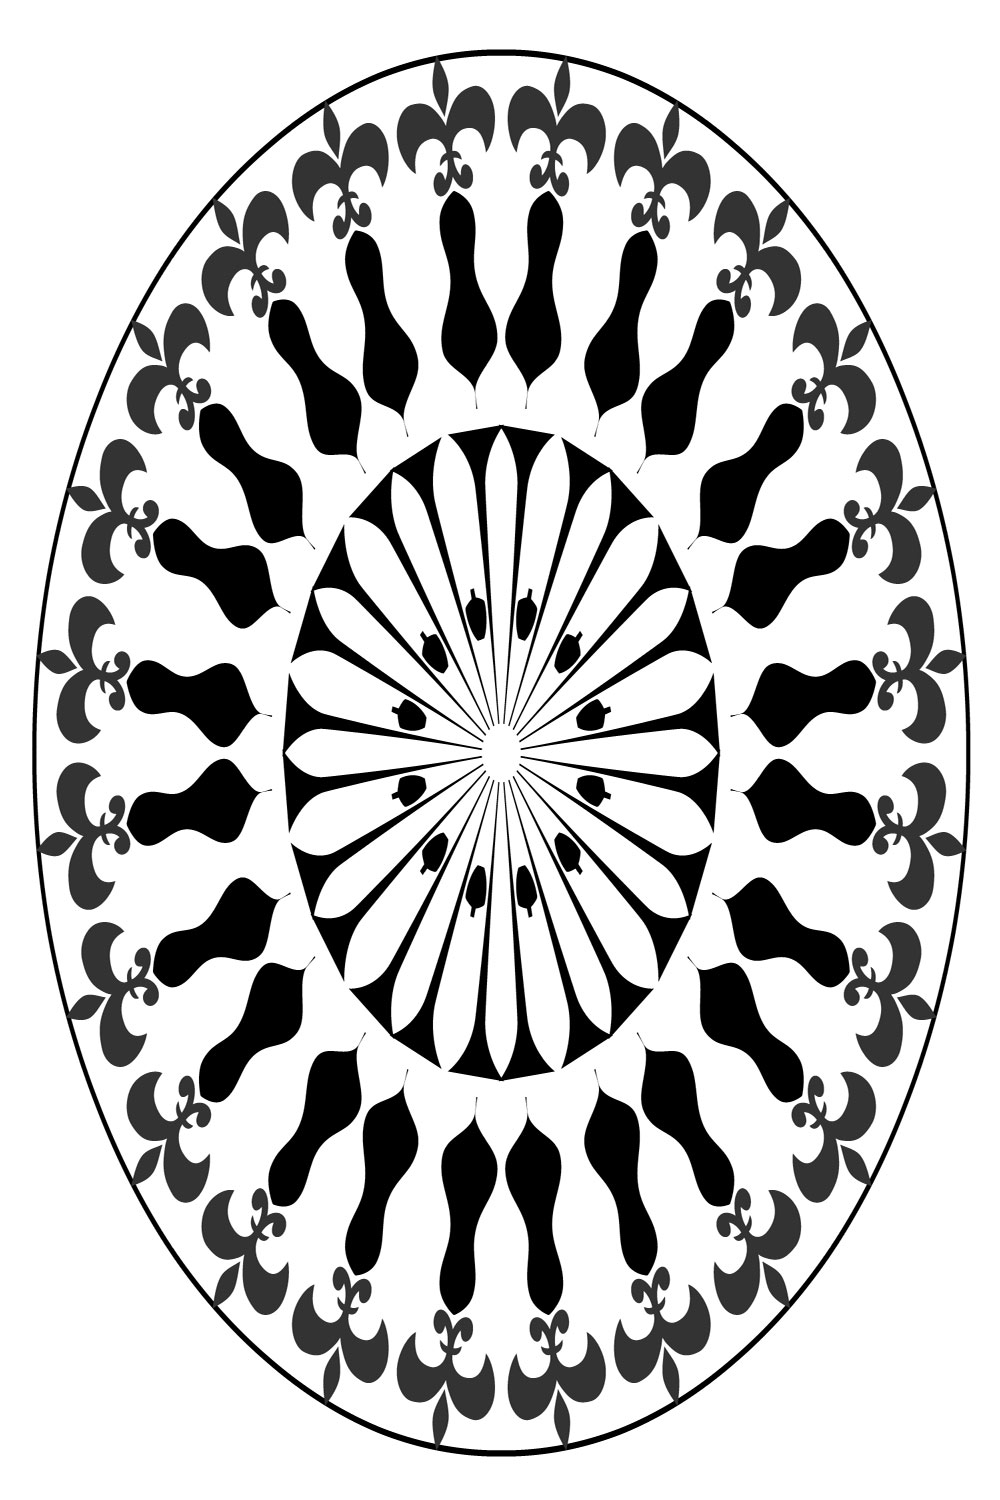 Mandala-Art-with-black-and-white-shades pinterest preview image.